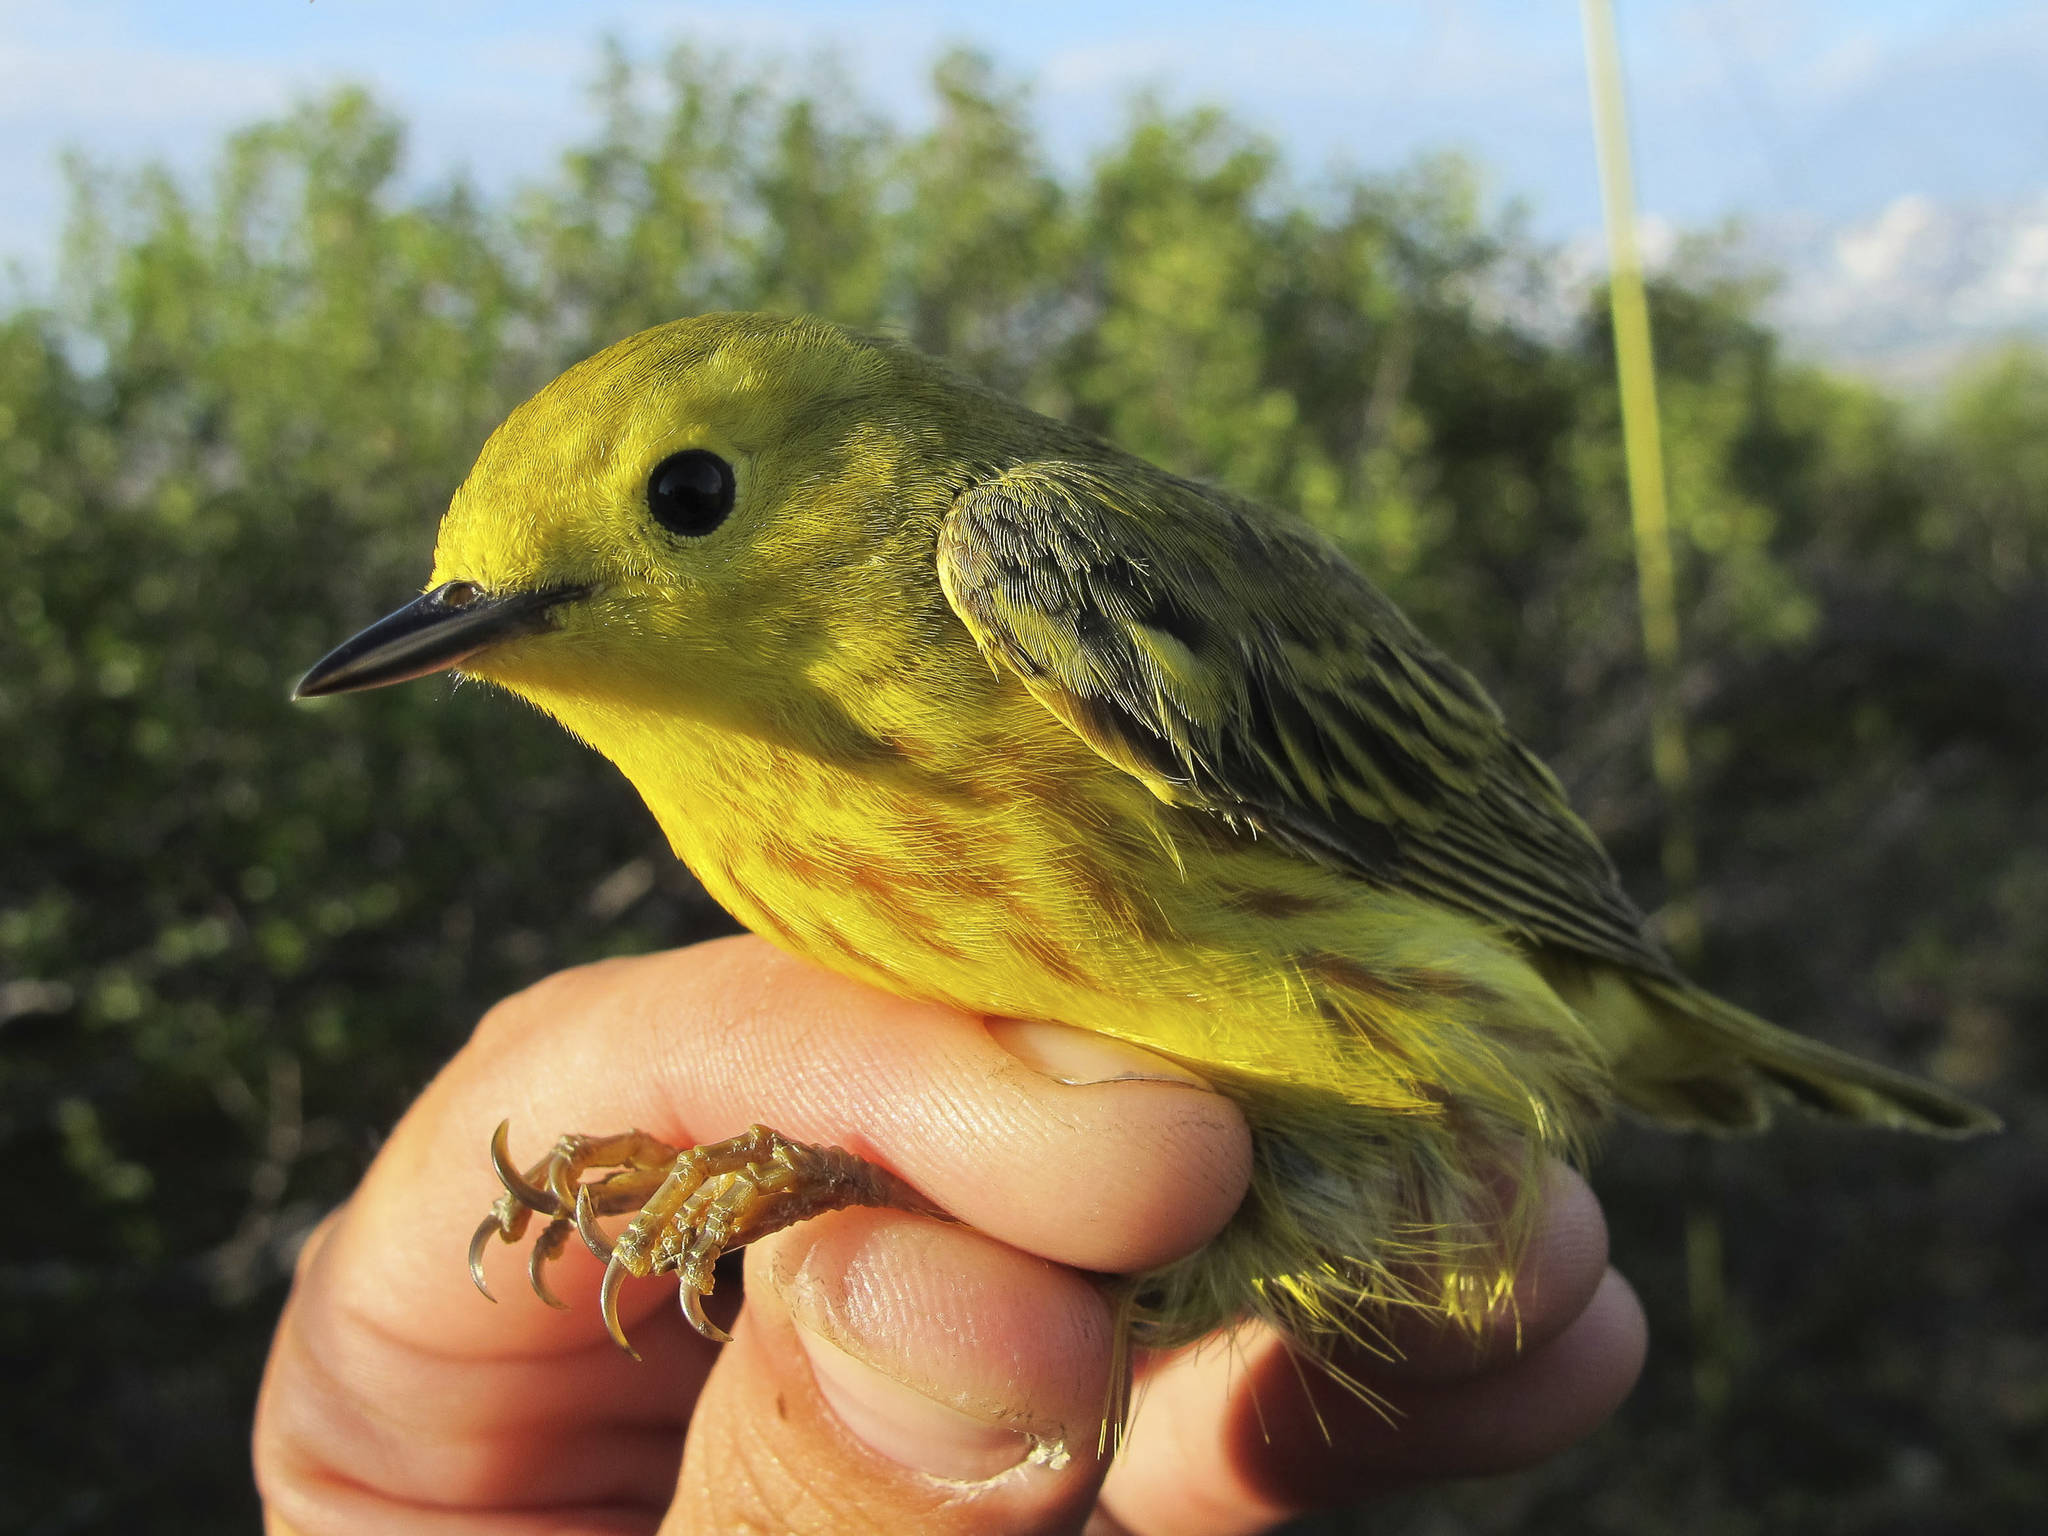 This June 18, 2016 photo provided by the U.S. Geological Survey shows a Yellow Warbler in Nome, Alaska. Growth of shrubs on Arctic tundra as the climate warms will have a mixed effect on breeding birds, federal researchers have concluded. Shrub density is not expected to harm species, but as shrubs grow taller, many bird species likely will find the habitat unsuitable, according to U.S. Geological Survey researchers. (Rachel M. Richardson/U.S. Geological Survey via AP)